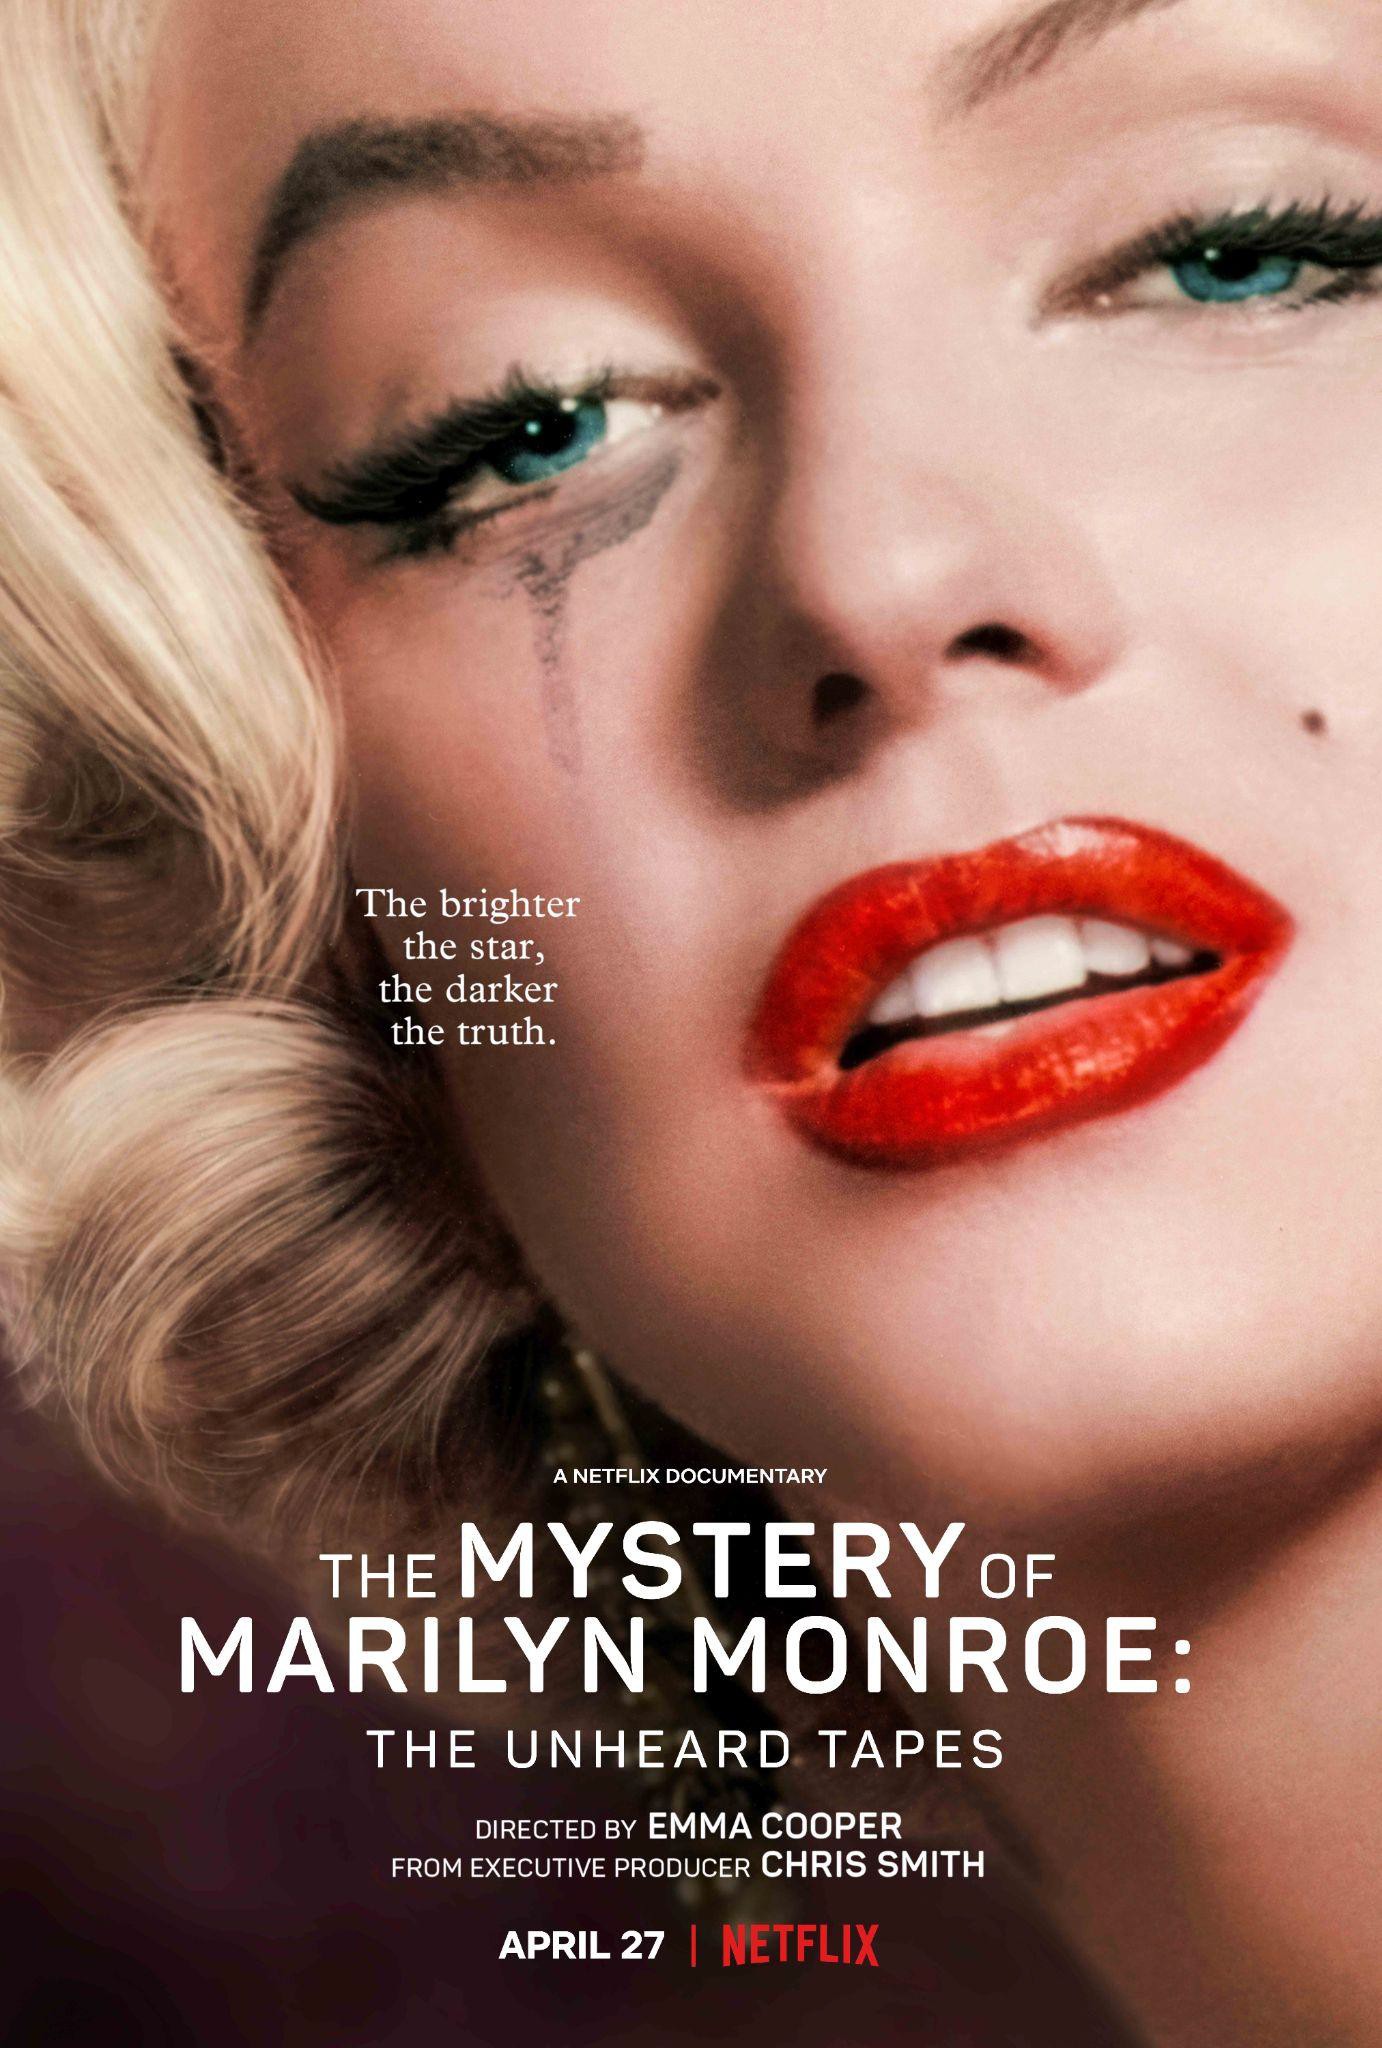 Unsolved History The Death of Marilyn Monroe (TV Episode 2003) - IMDb